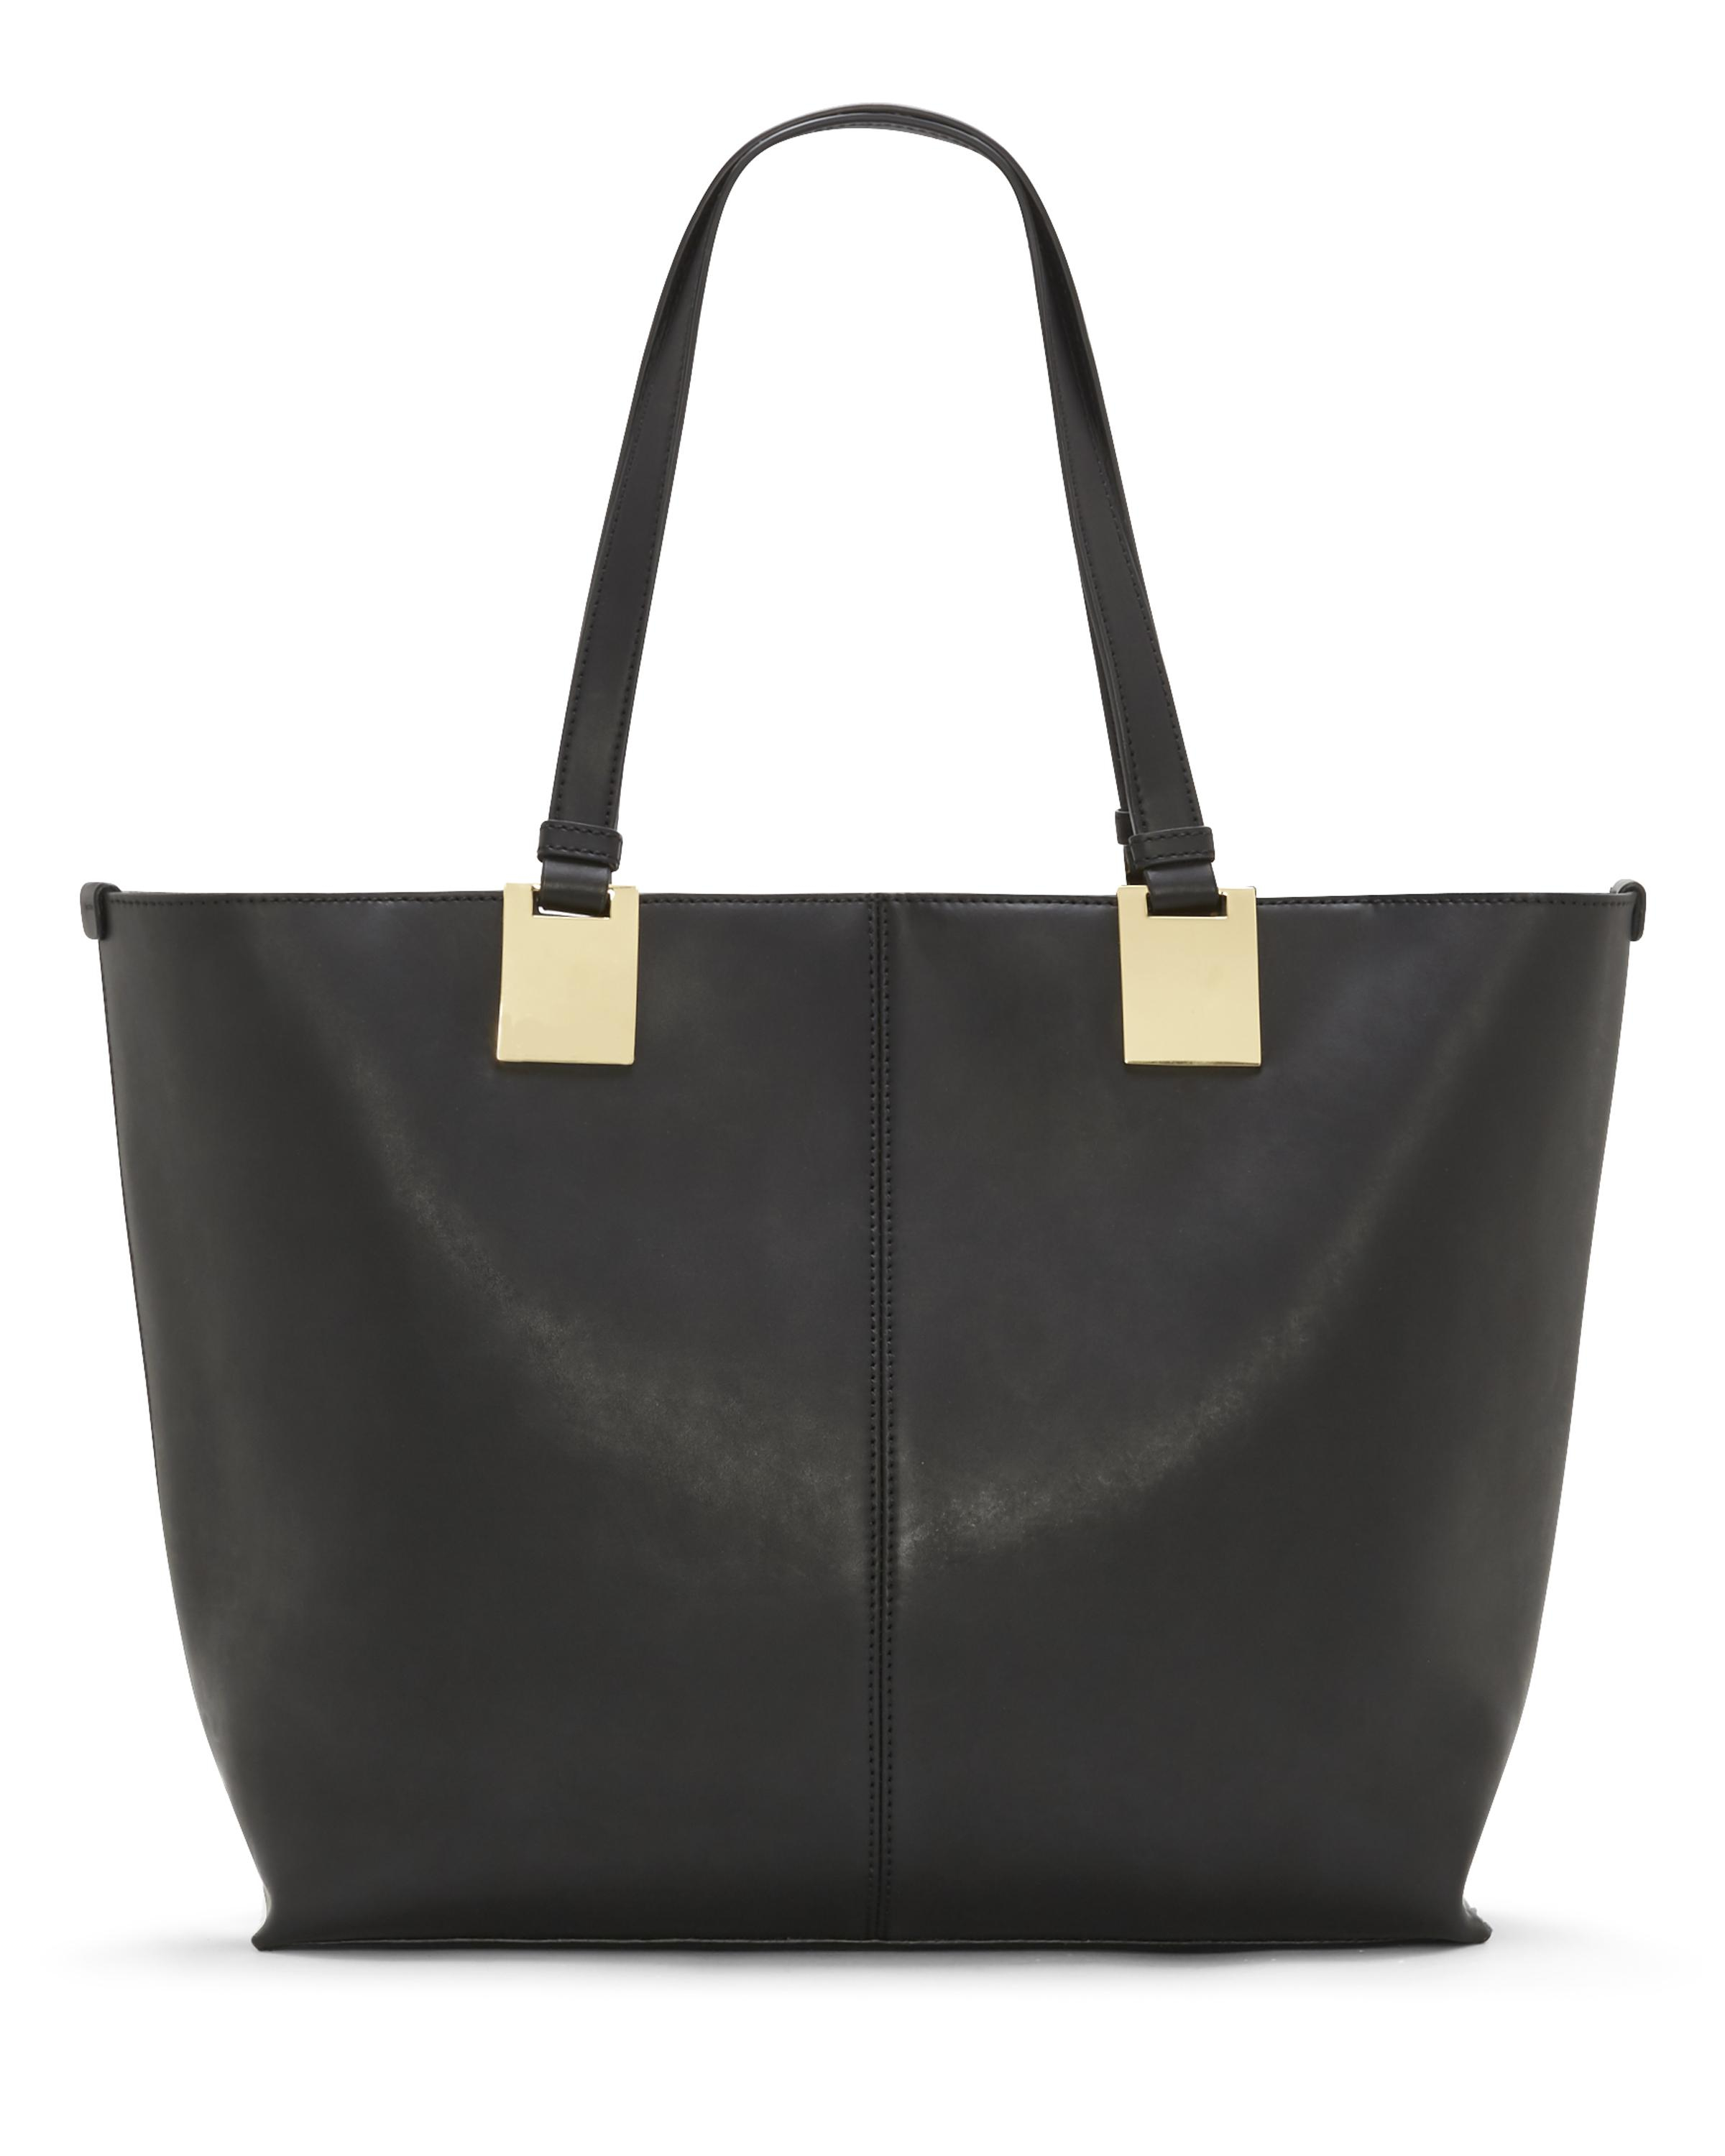 Vince camuto Keena Leather Tote in Black | Lyst